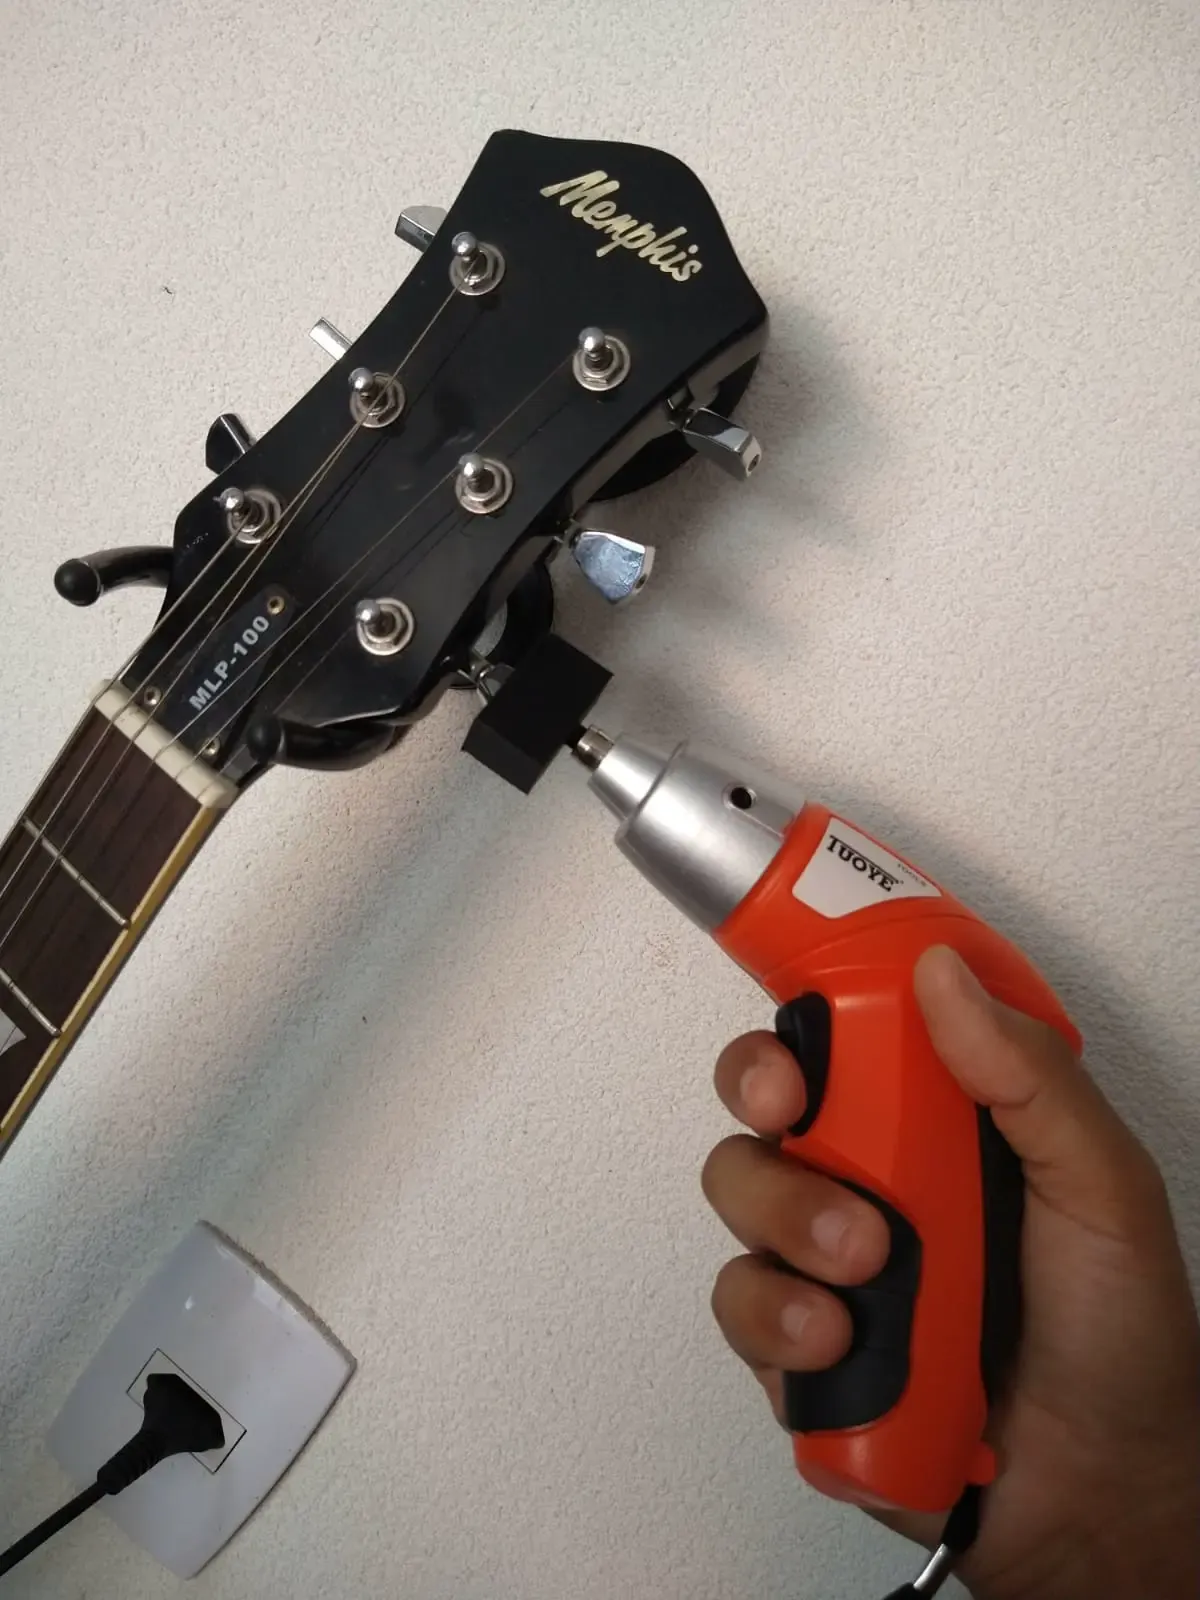 guitar adapter to use as a screwdriver